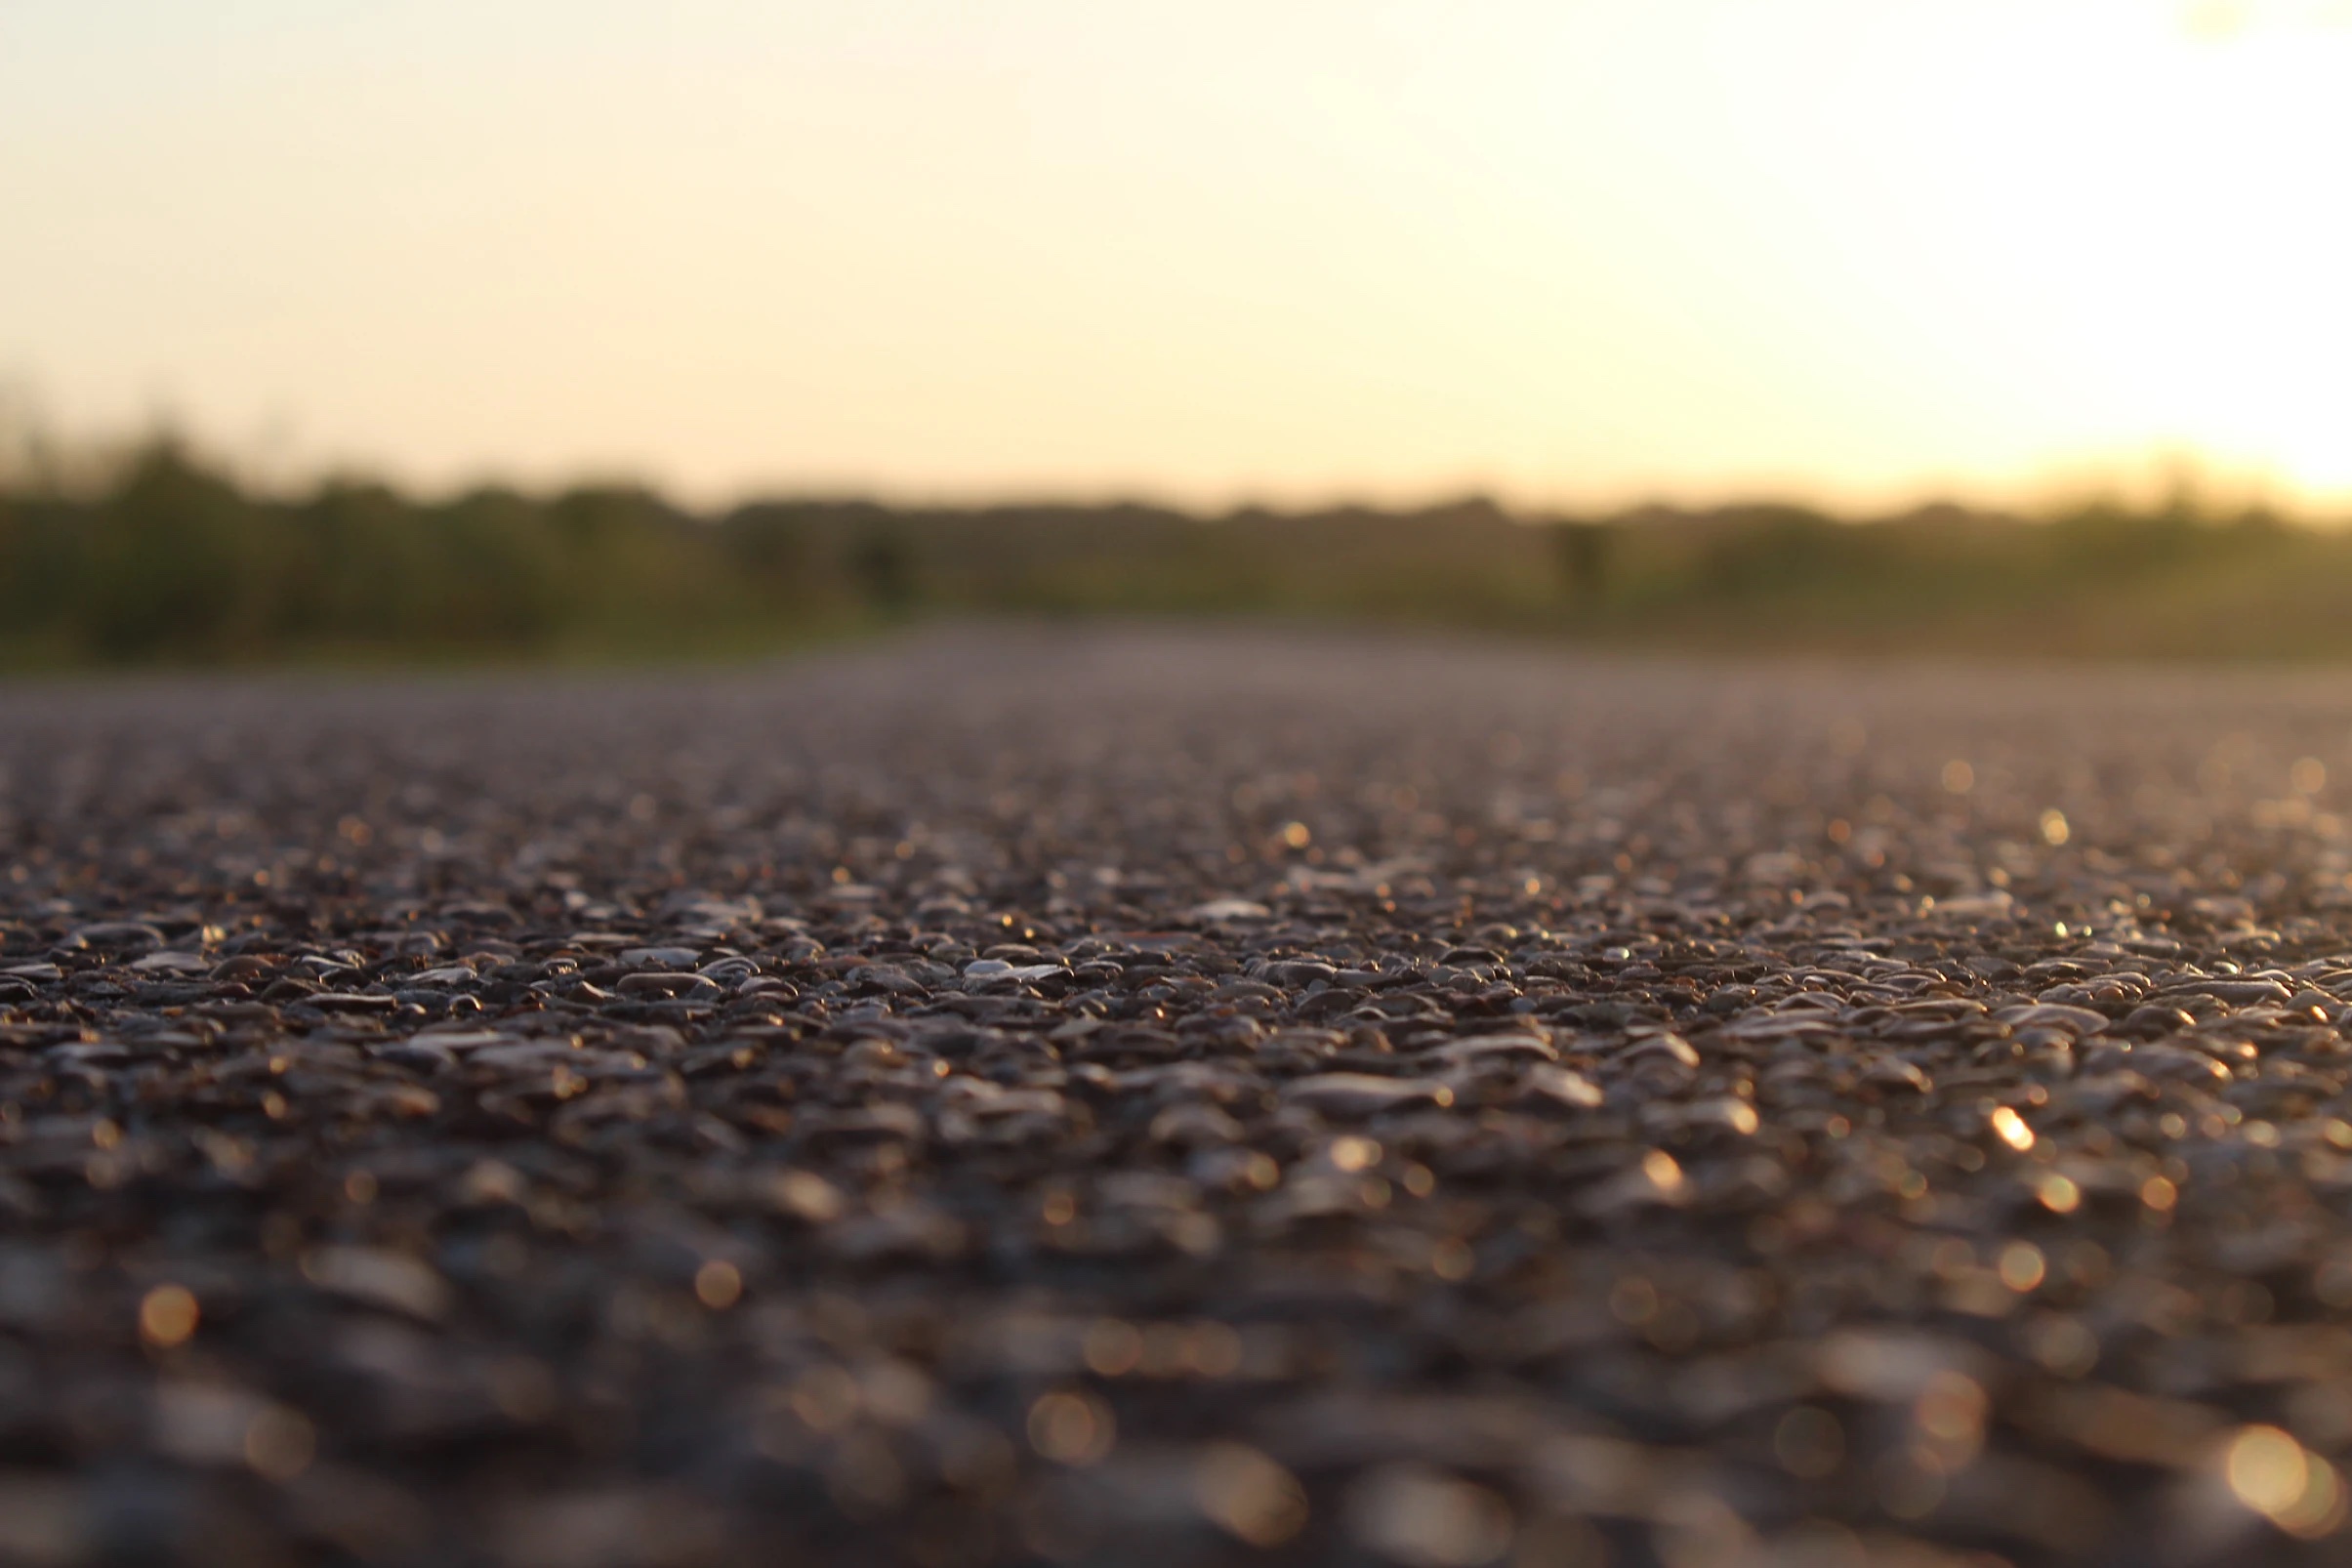 photo of pavement from a low perspective showing shallow depth of field, with a tree line off in the distance during sunset